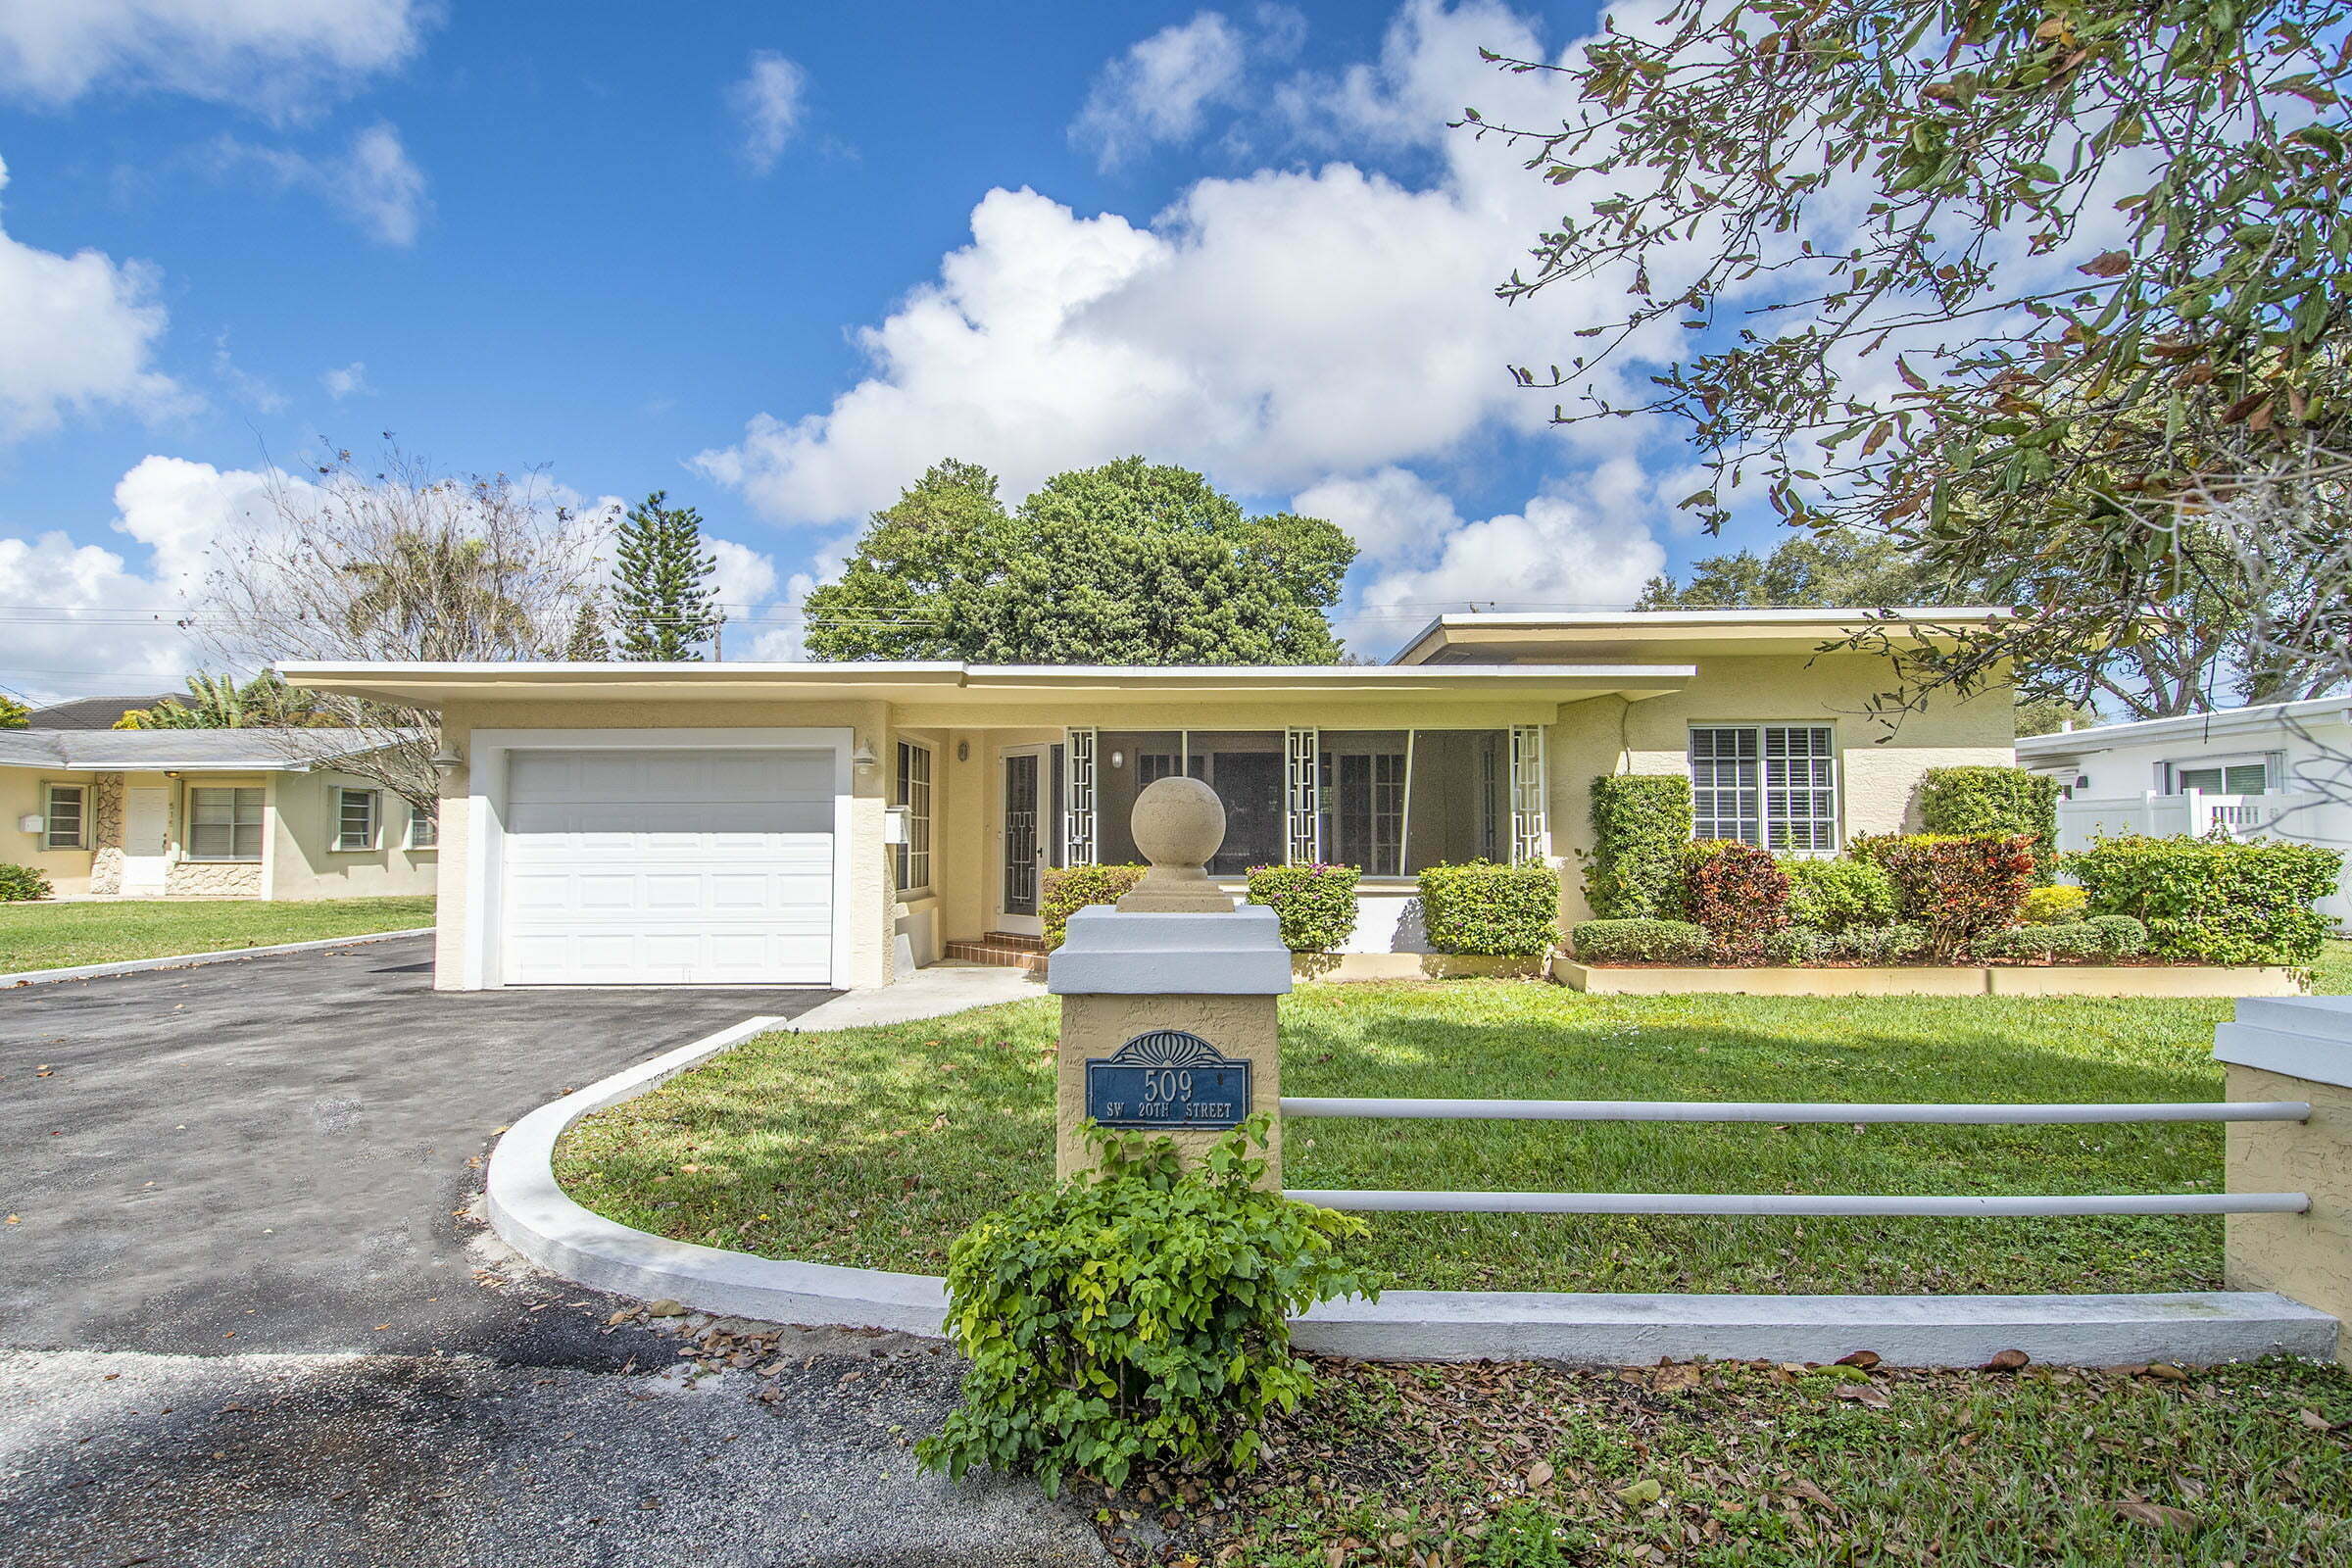 House Front 2 - 509 SW 20th Street, Fort Lauderdale, FL 33315 - © Flat Fee Florida Realty